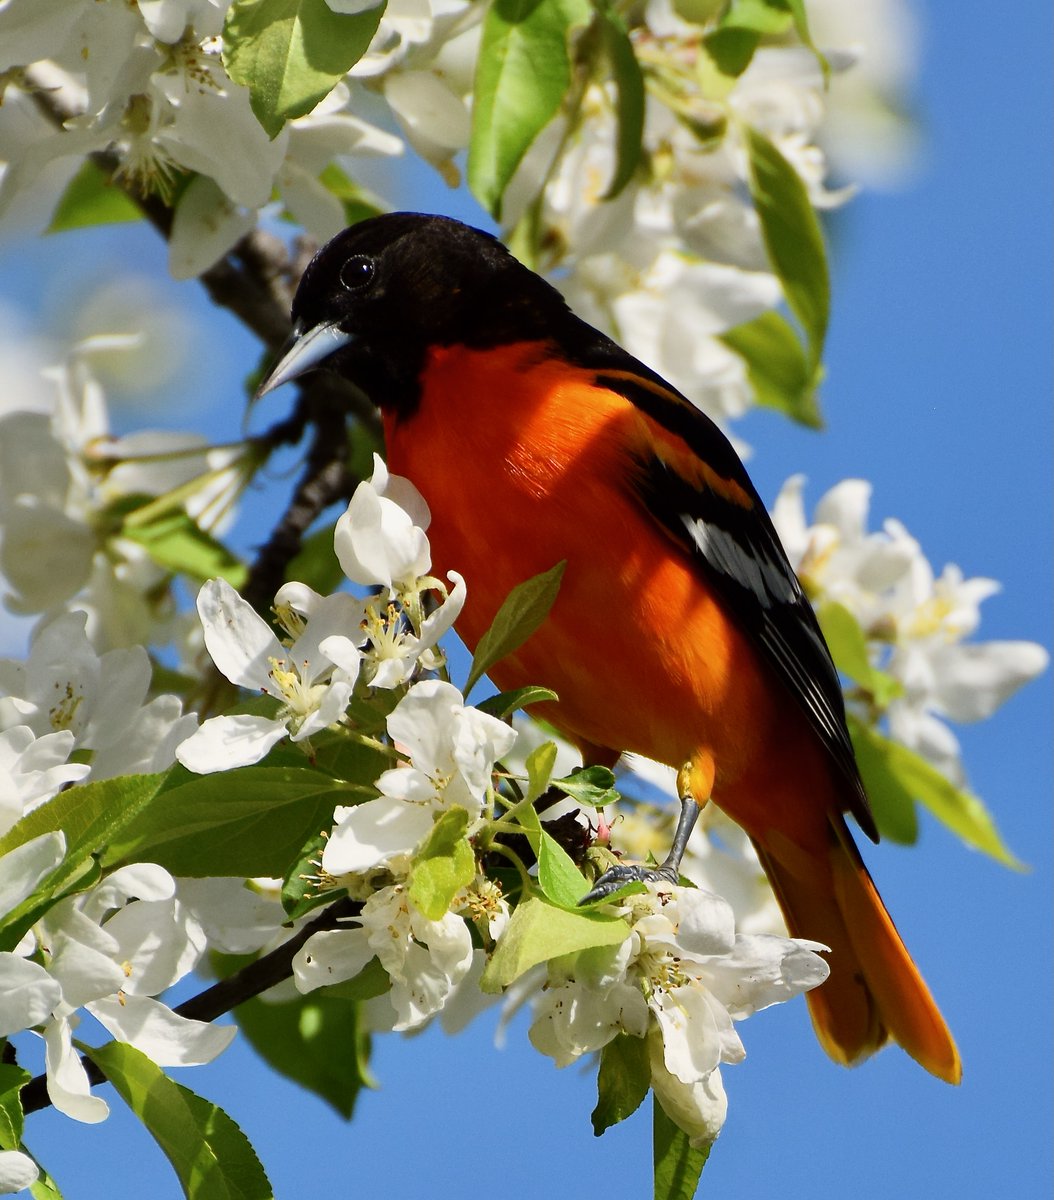 Blossoms and Birds ... a beautiful Baltimore Oriole amongst the apple blossoms at the Dominion Arboretum. If I were a bird I would spend my day in here too! #birds #birdswatching #wildlifephotography #Ottawa #ShareYourWeather #StormHour @ThePhotoHour